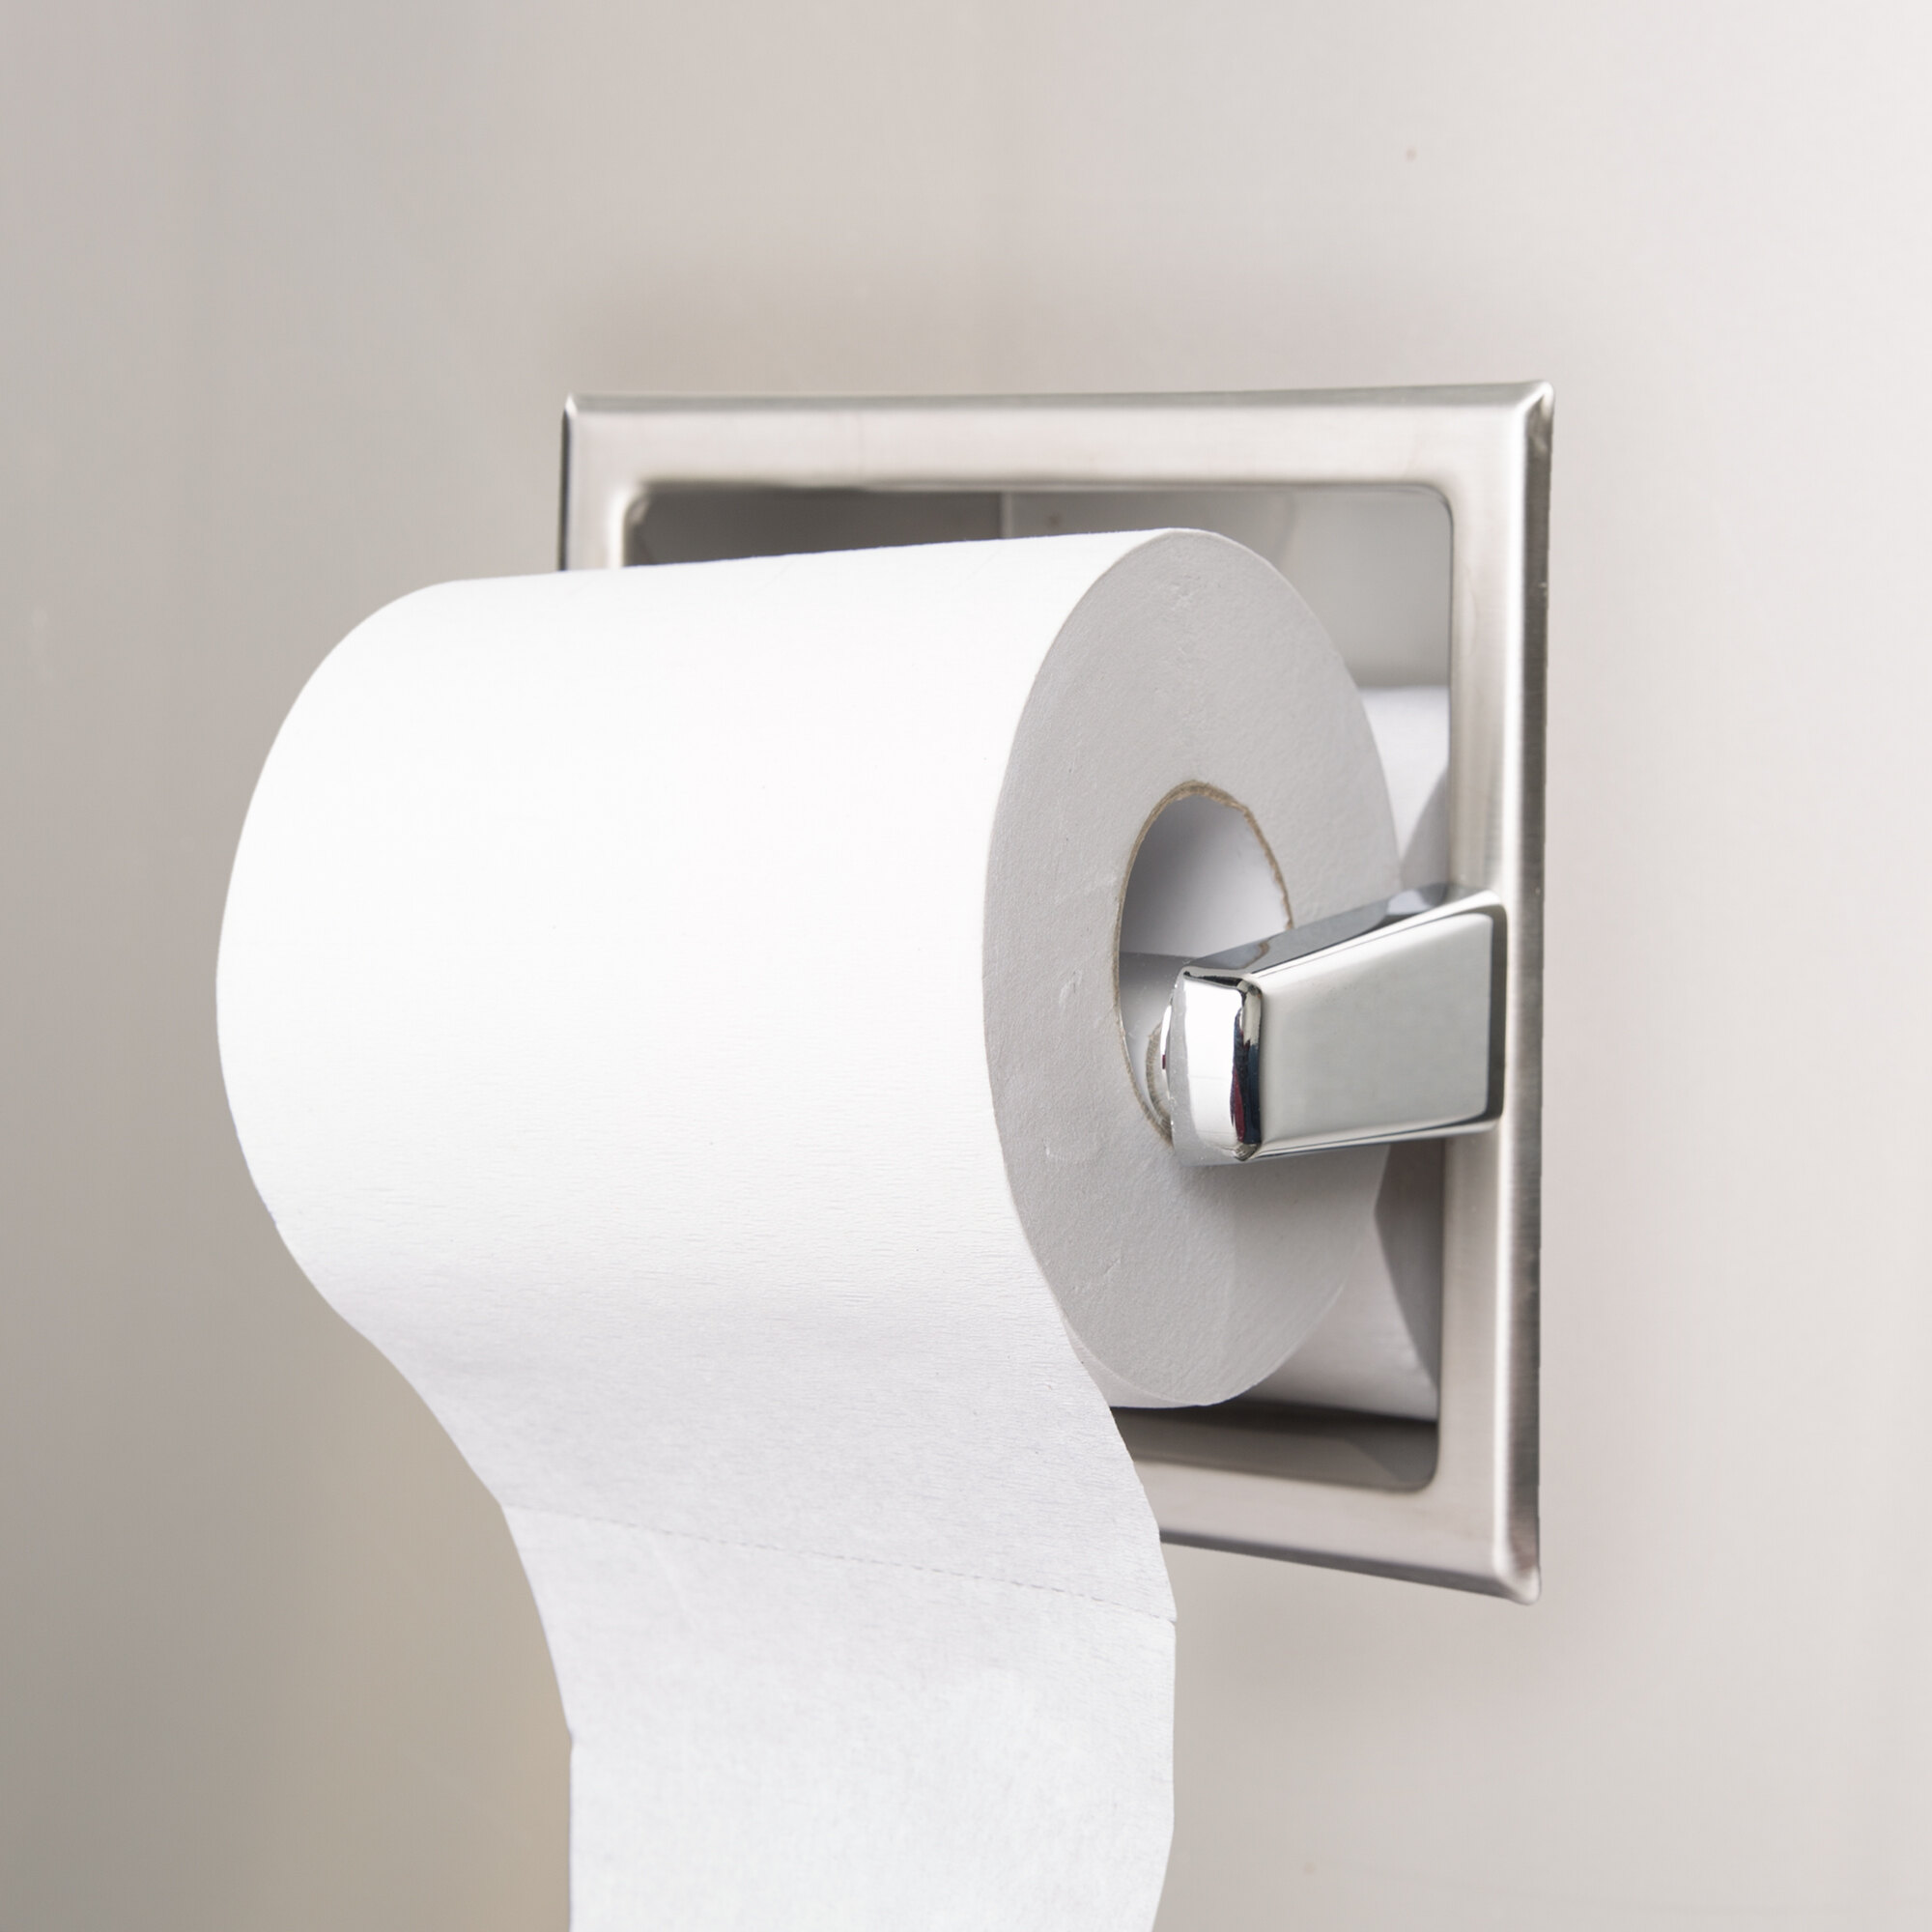 Bobrick B 6637 Recessed Toilet Tissue Dispenser With Storage For Extra Roll With Satin Finish